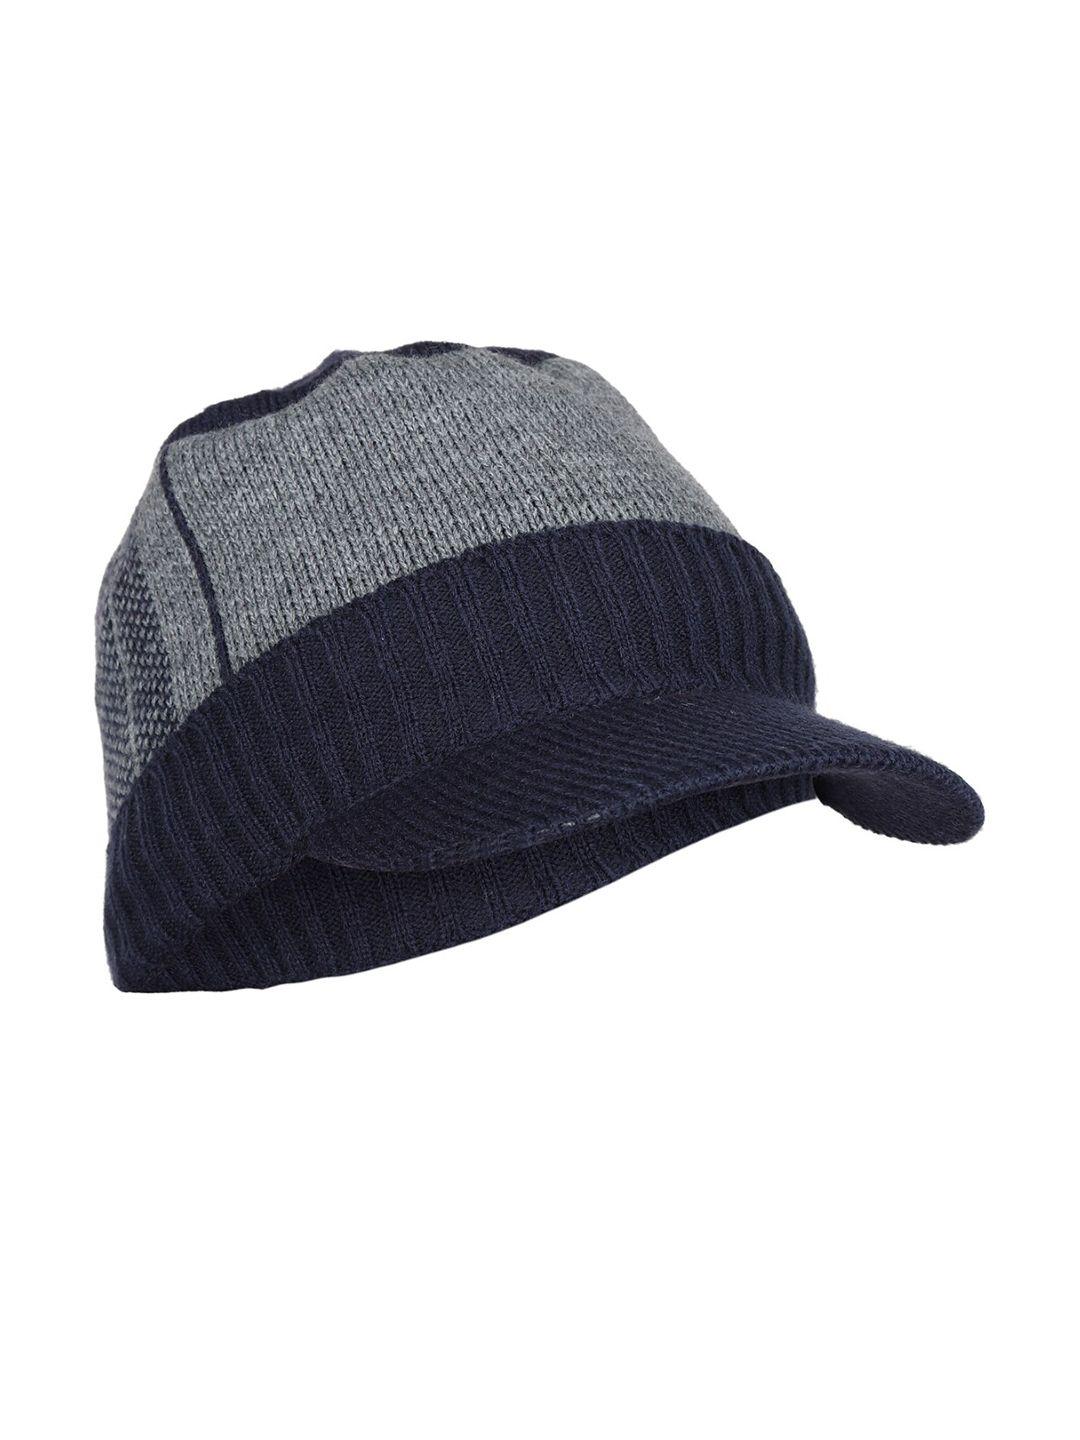 isweven unisex blue & grey solid woven expandable visor cap